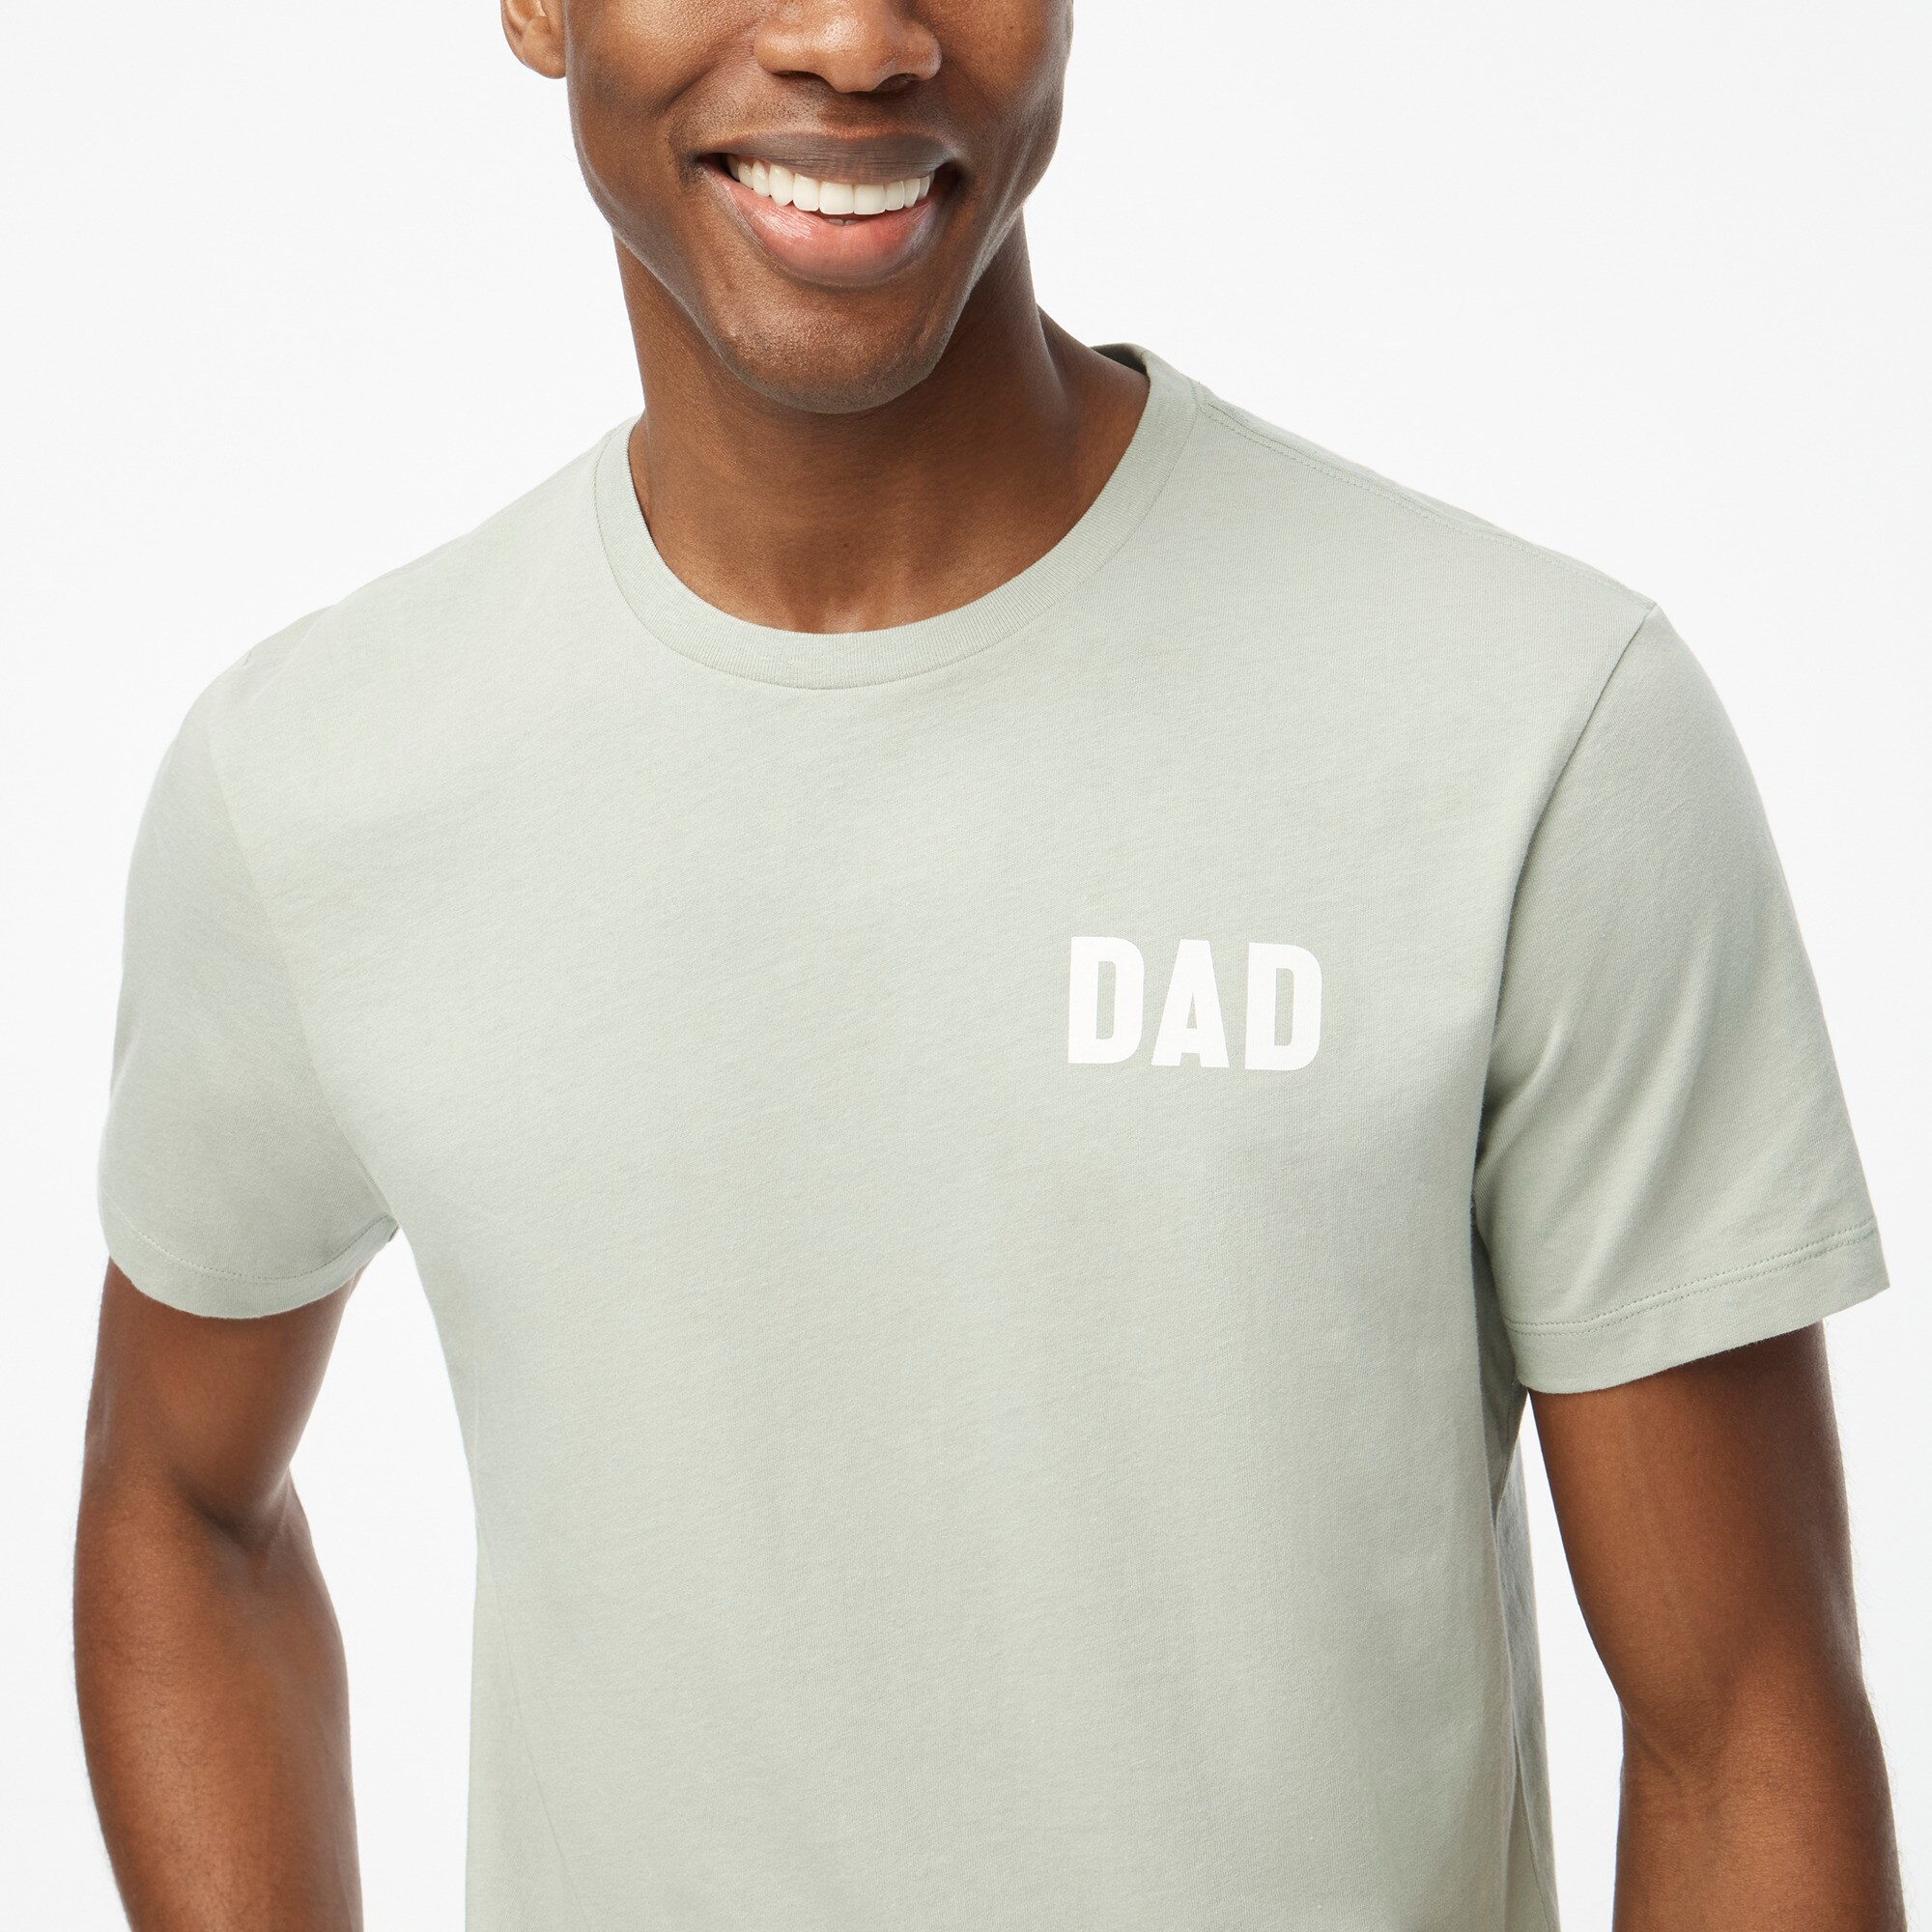  Dad graphic tee